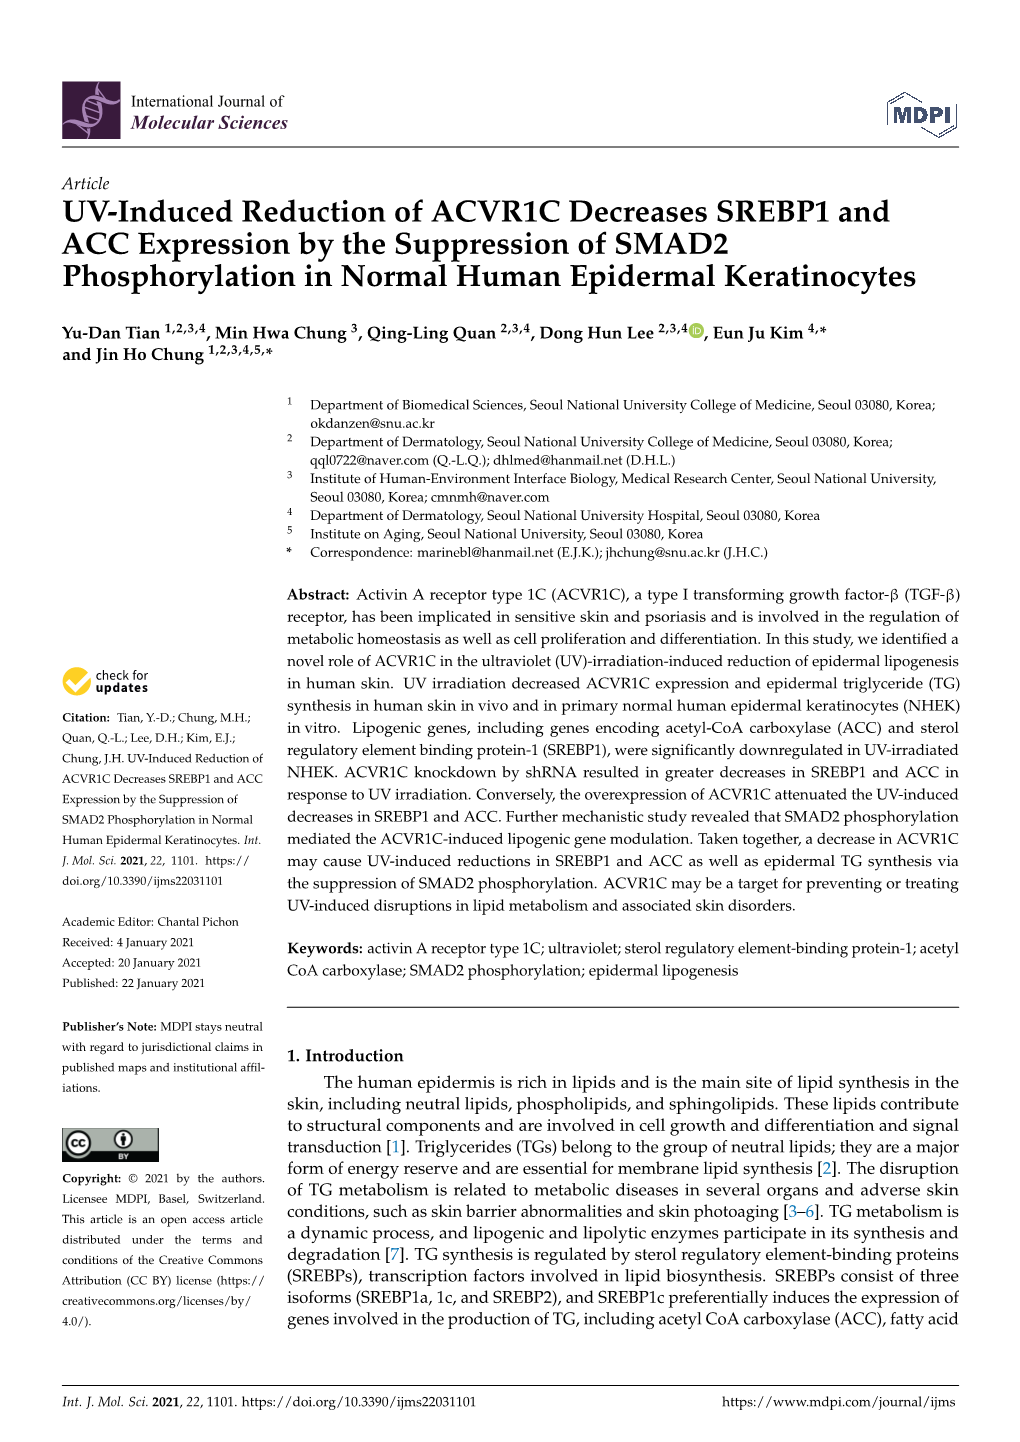 UV-Induced Reduction of ACVR1C Decreases SREBP1 and ACC Expression by the Suppression of SMAD2 Phosphorylation in Normal Human Epidermal Keratinocytes